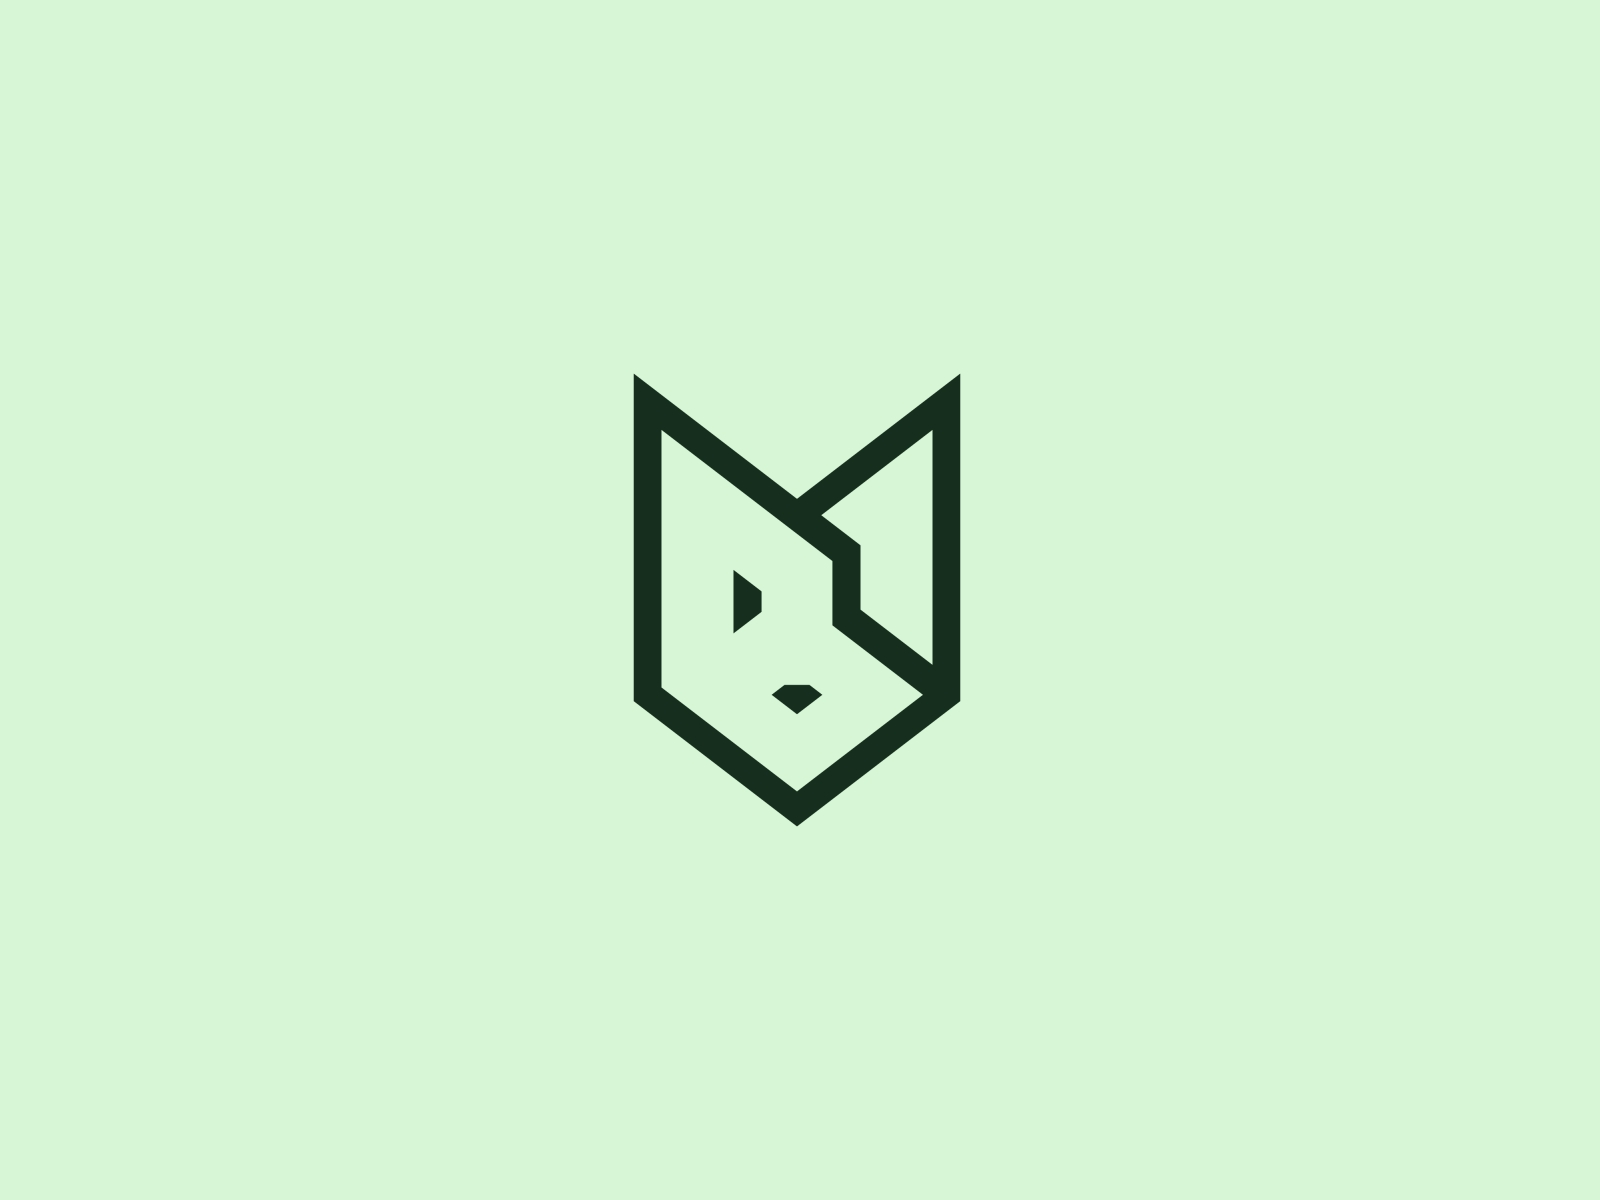 Letter B logo with fox simplicity by Roprop Mustawan on Dribbble.